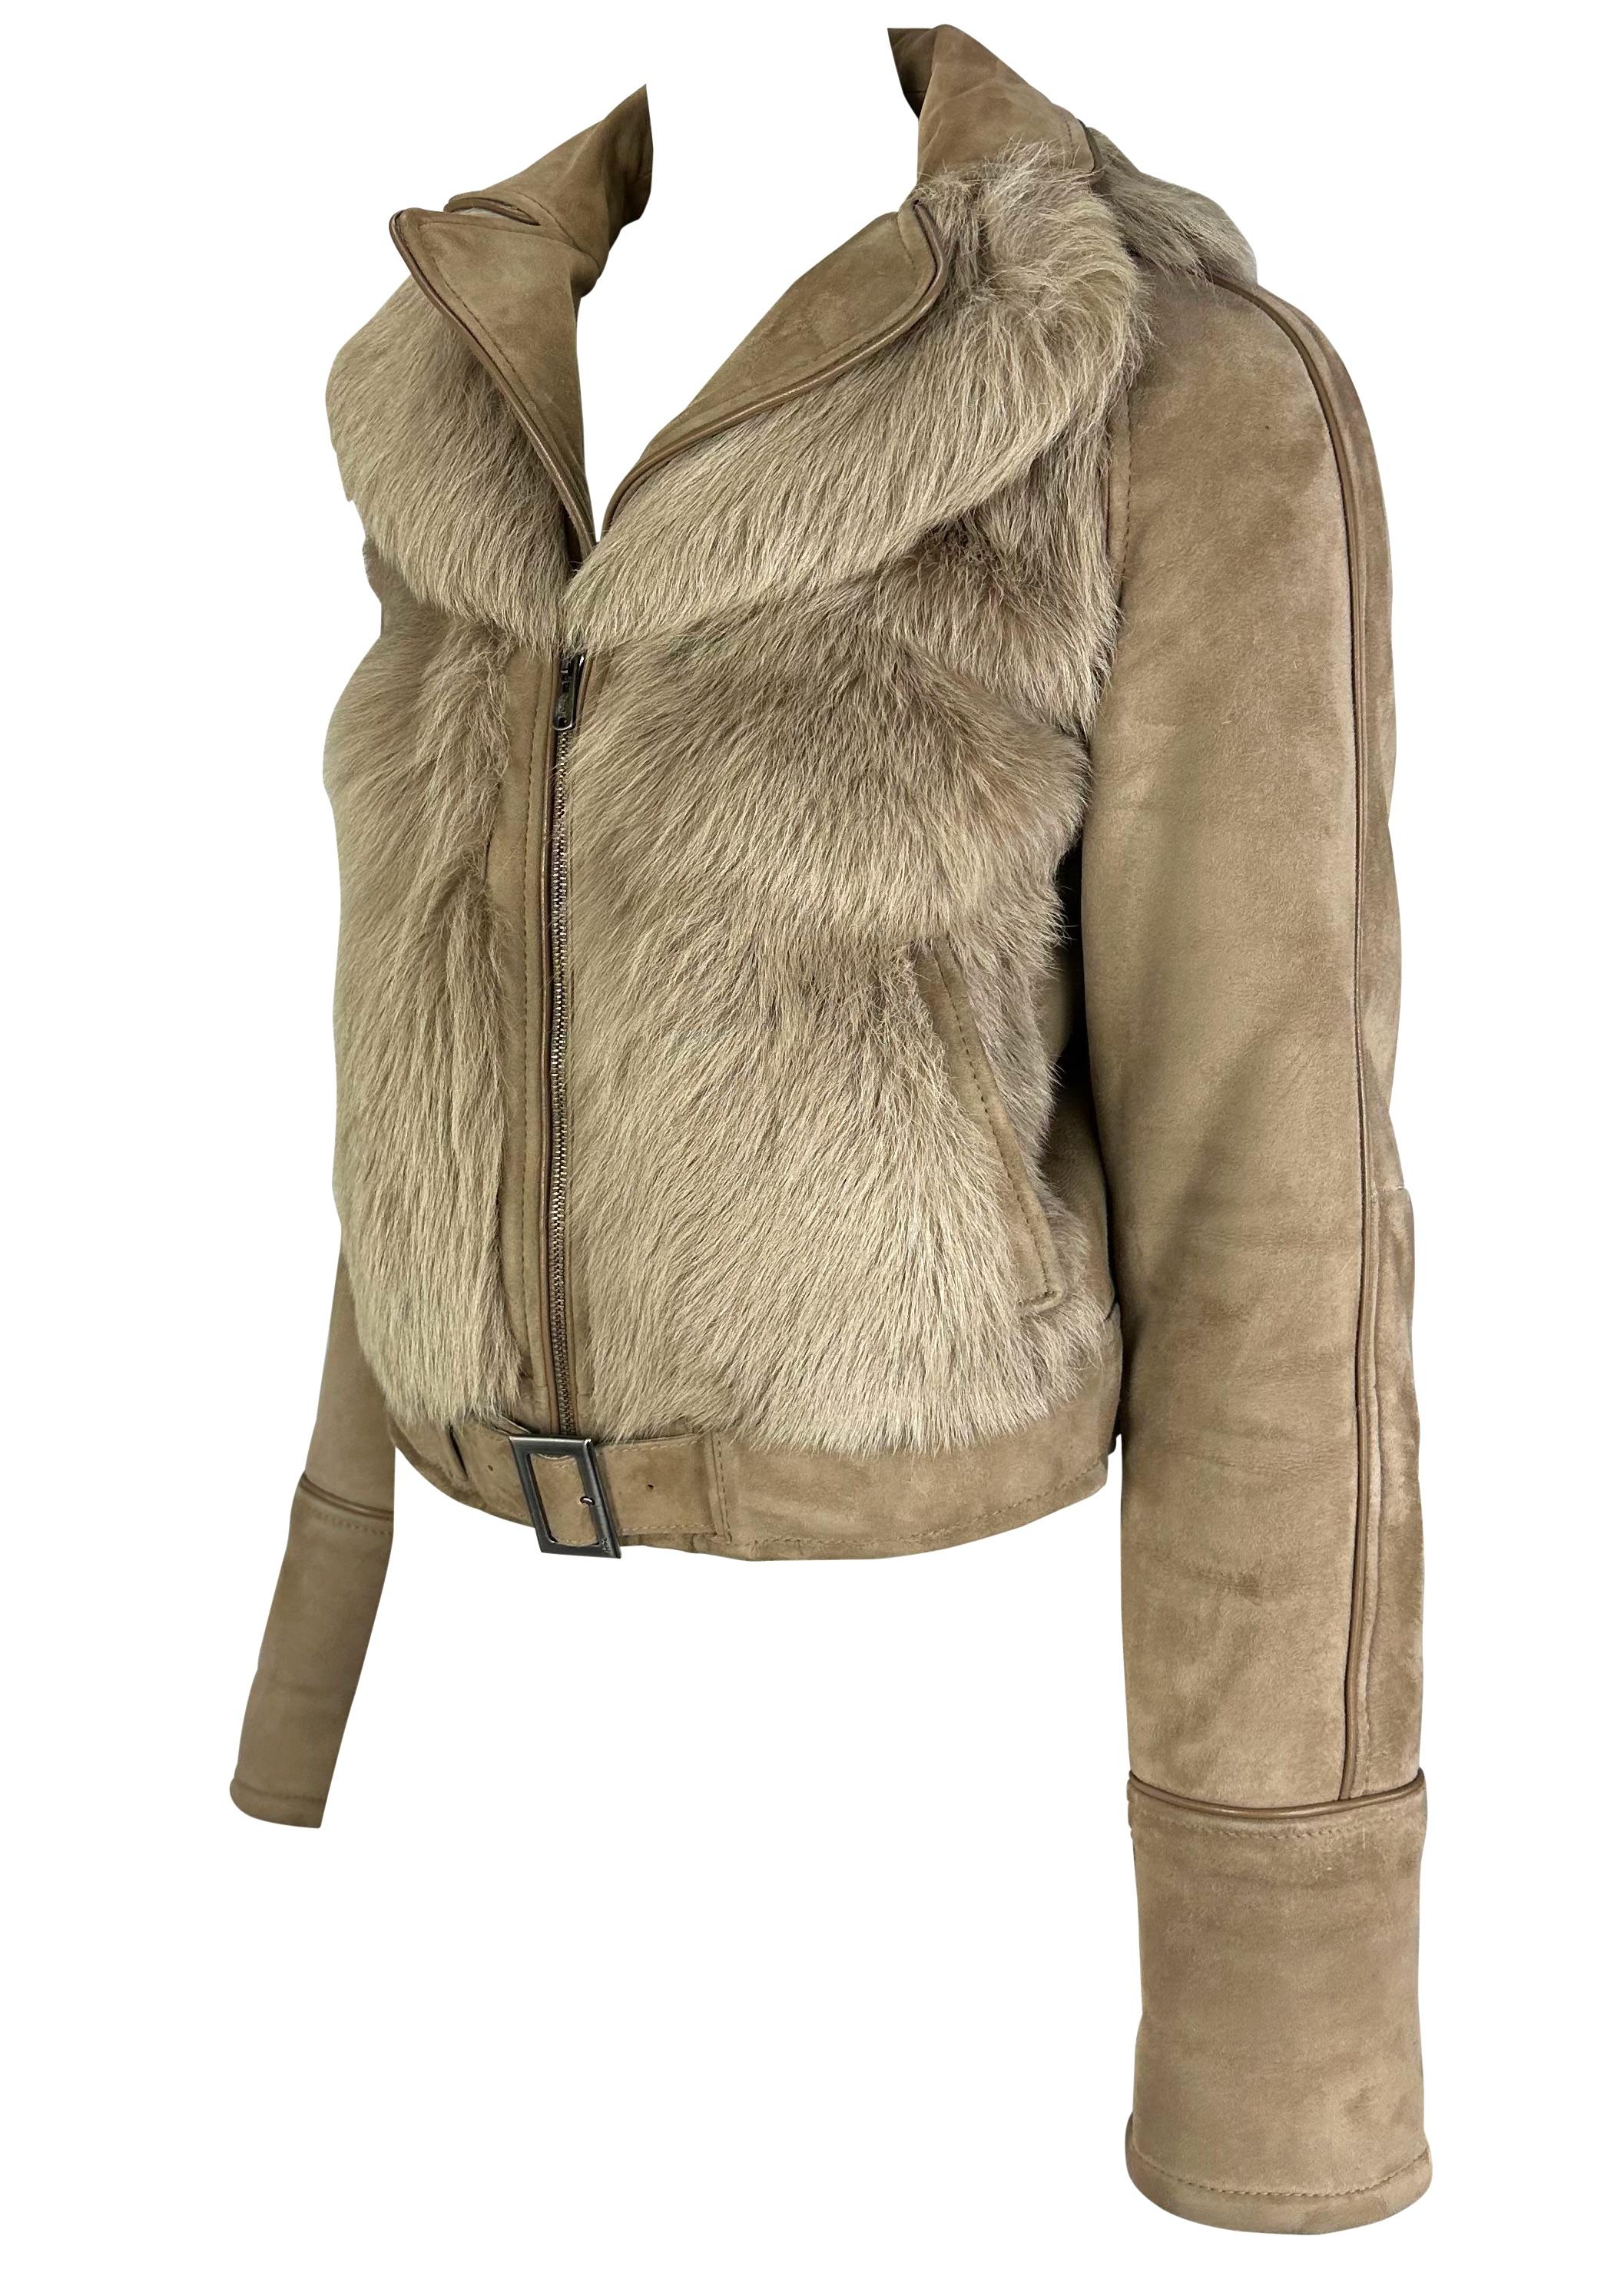 Presenting a fabulous beige goat fur suede Yves Saint Laurent moto coat. From the early 2000s, this incredible coat is constructed entirely of monotone fur and supple suede with a zipper closure, belt, and layered collar. This stunning coat is sure